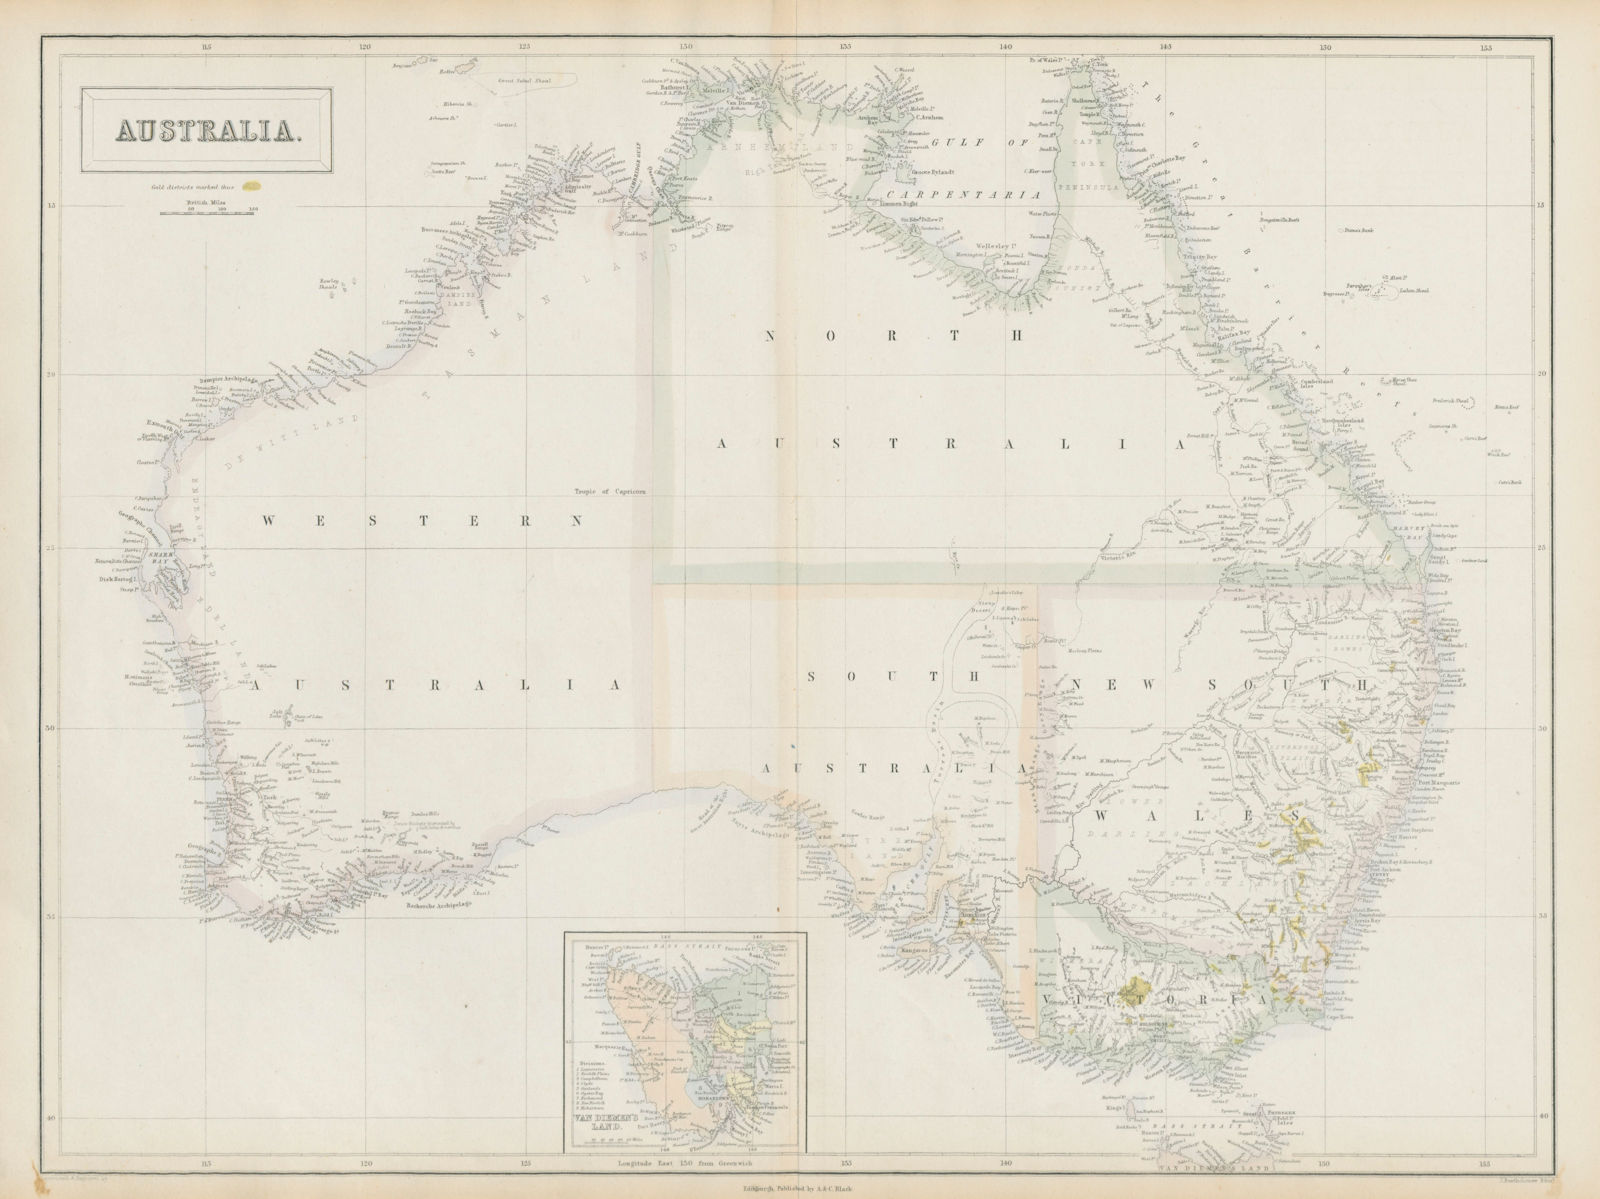 Gold rush Australia showing gold districts in yellow. SIDNEY HALL 1856 map